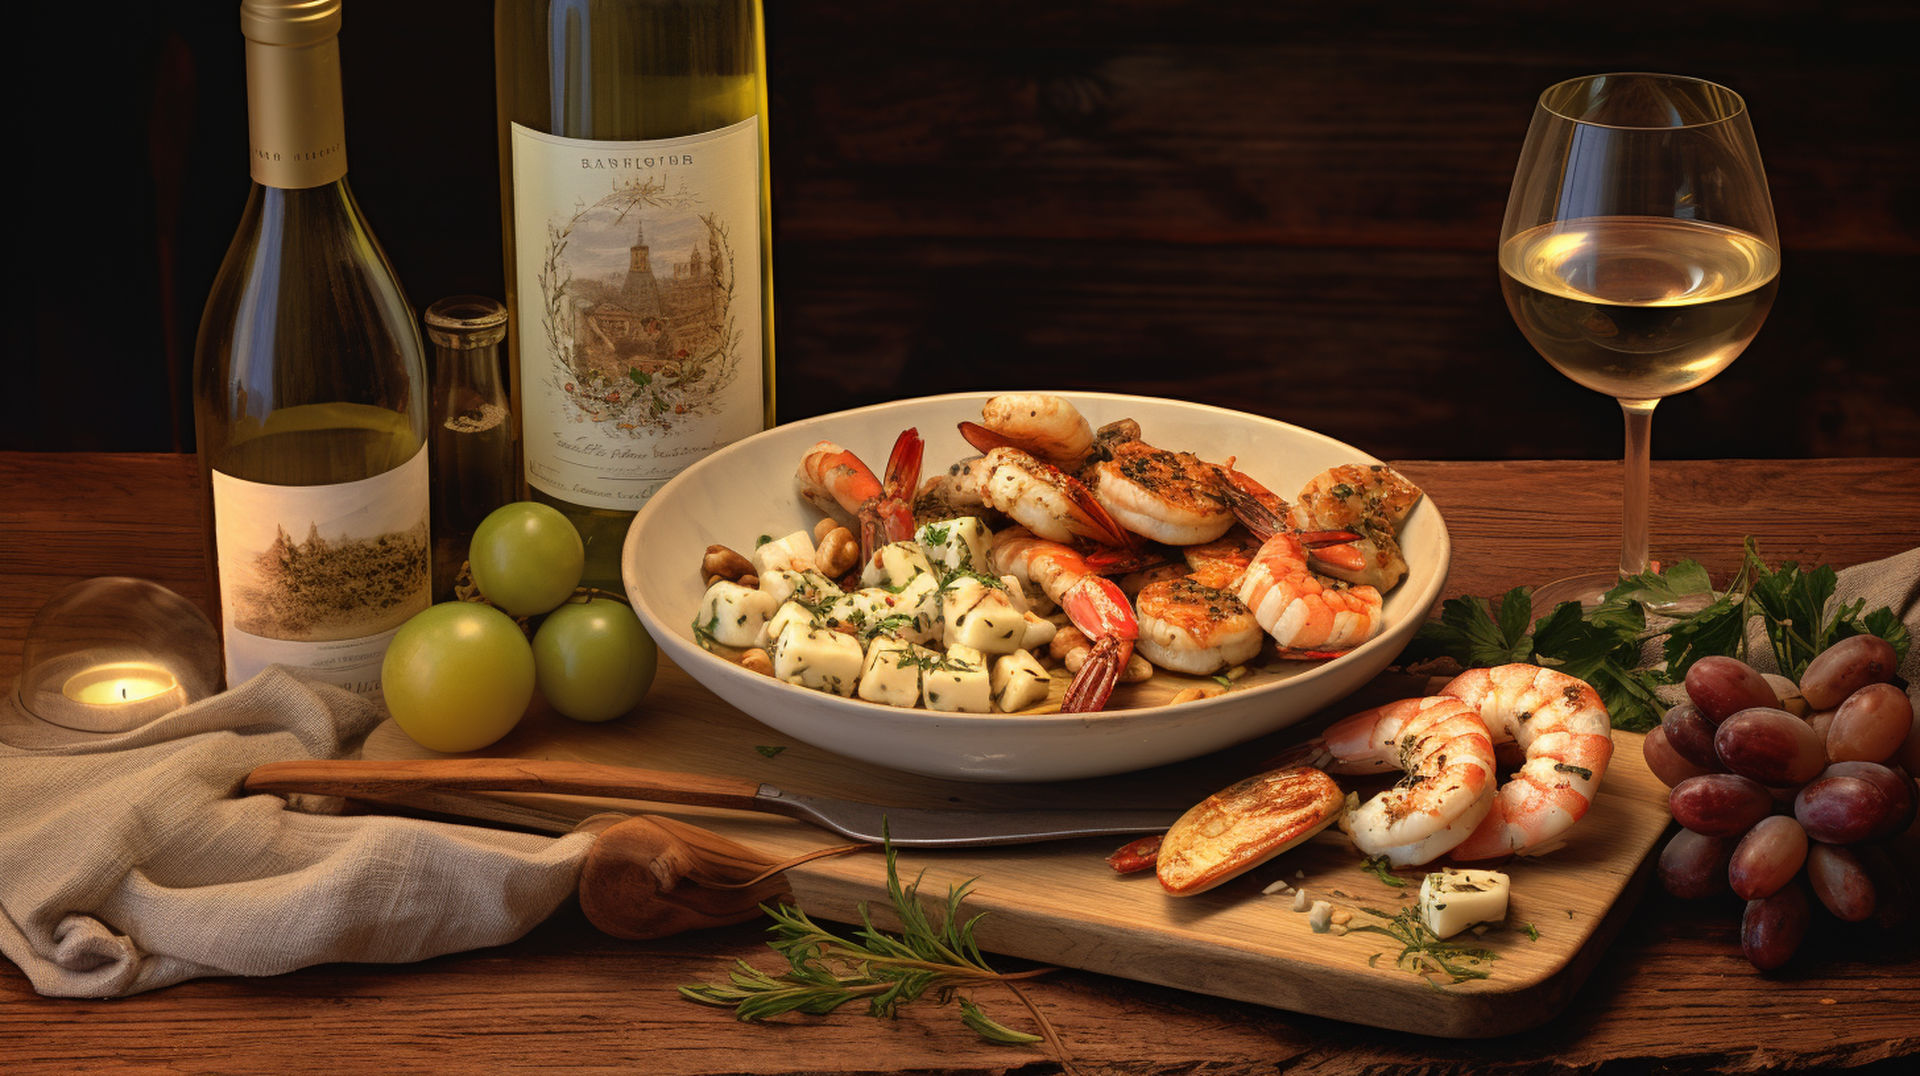  image showcasing a bottle of Chardonnay surrounded by a variety of foods such as grilled chicken, camembert cheese, buttery shrimp, and roasted almonds, all set on a rustic wooden table.